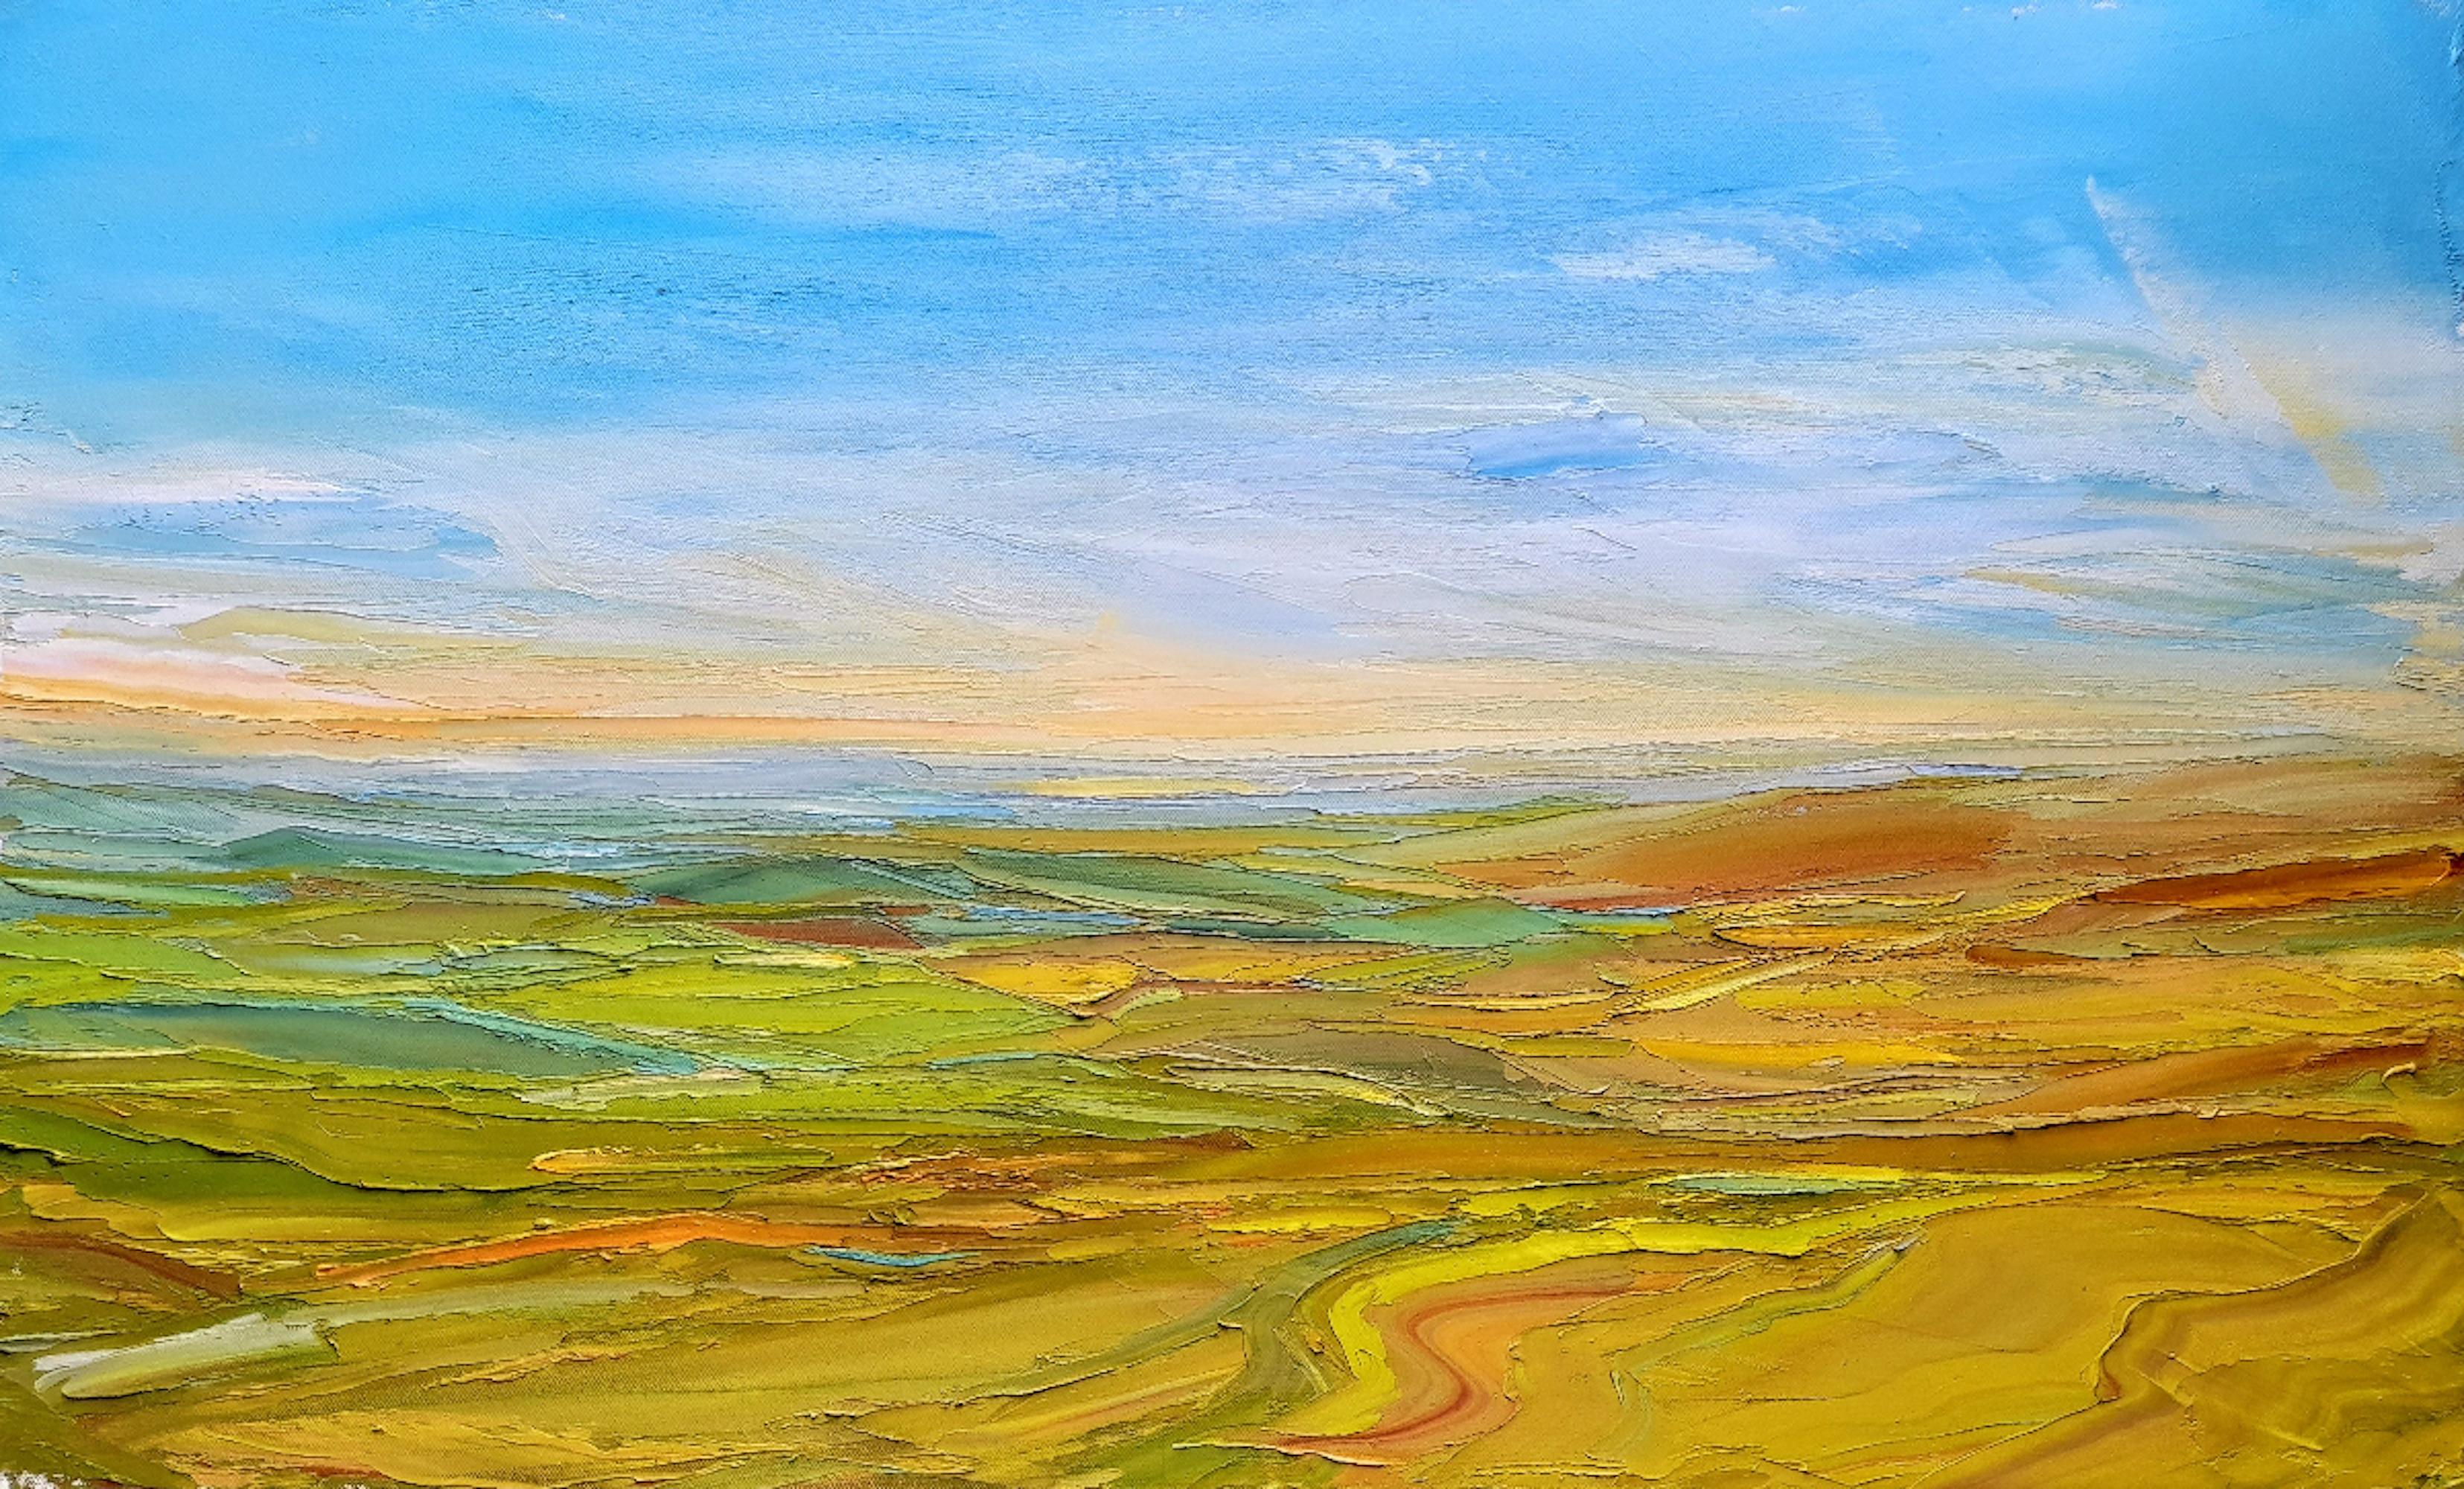 Morning through Dartmoor by Georgie Dowling [2022]
Signed by the artist
Oil paint on canvas
Image size: H:50 cm x W:75 cm x D:4cm
Please note that insitu images are purely an indication of how a piece may look
Morning through Dartmoor is a palette